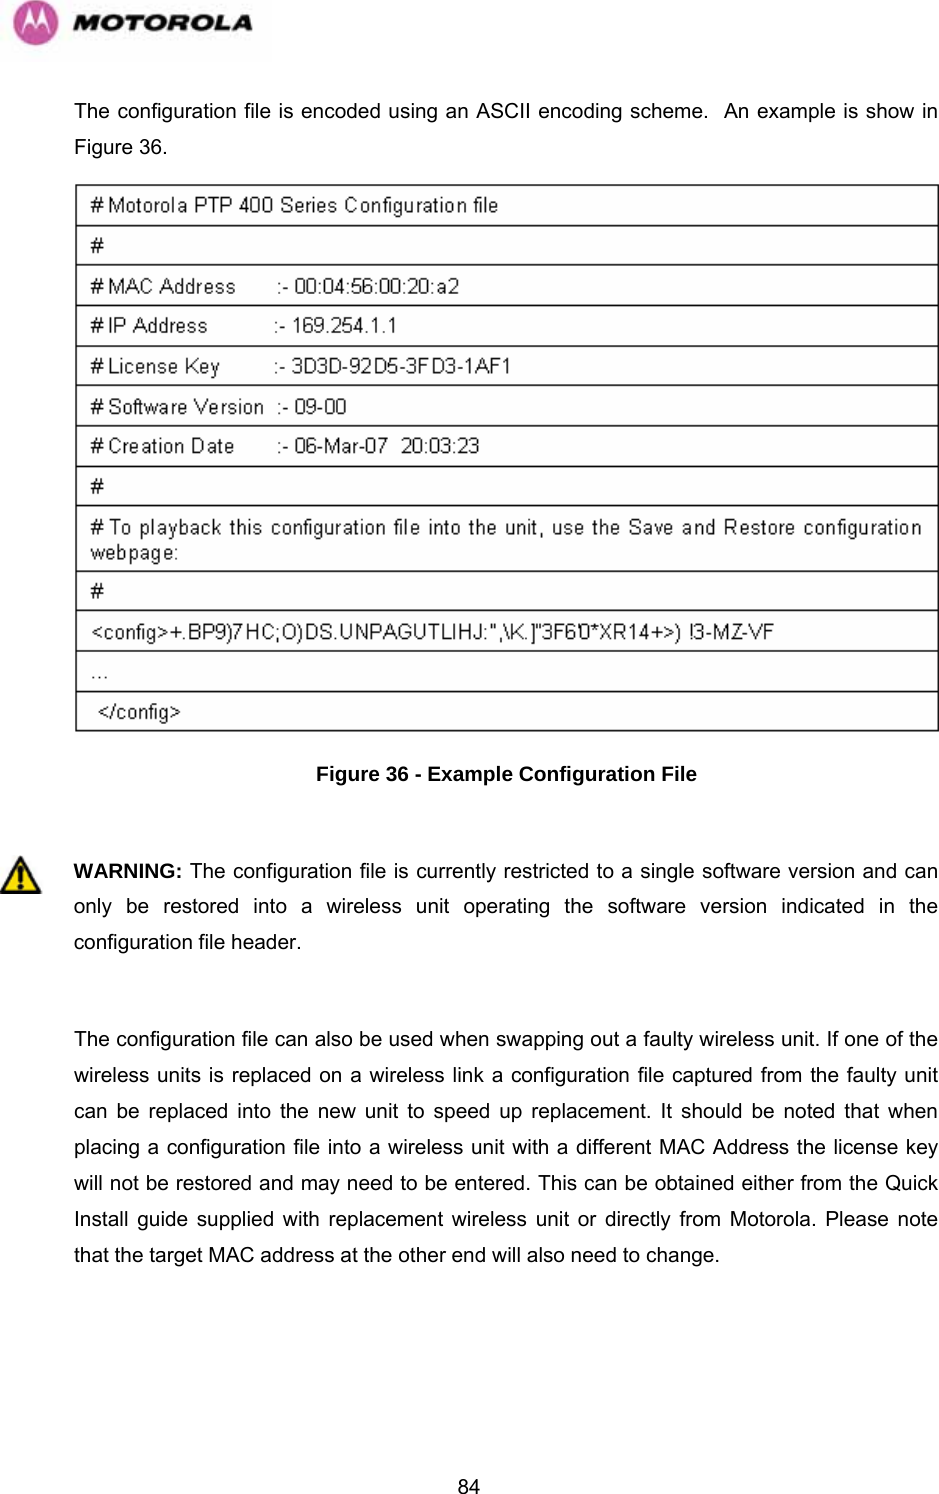   84The configuration file is encoded using an ASCII encoding scheme.  An example is show in Figure 36.  Figure 36 - Example Configuration File  WARNING: The configuration file is currently restricted to a single software version and can only be restored into a wireless unit operating the software version indicated in the configuration file header.  The configuration file can also be used when swapping out a faulty wireless unit. If one of the wireless units is replaced on a wireless link a configuration file captured from the faulty unit can be replaced into the new unit to speed up replacement. It should be noted that when placing a configuration file into a wireless unit with a different MAC Address the license key will not be restored and may need to be entered. This can be obtained either from the Quick Install guide supplied with replacement wireless unit or directly from Motorola. Please note that the target MAC address at the other end will also need to change.  